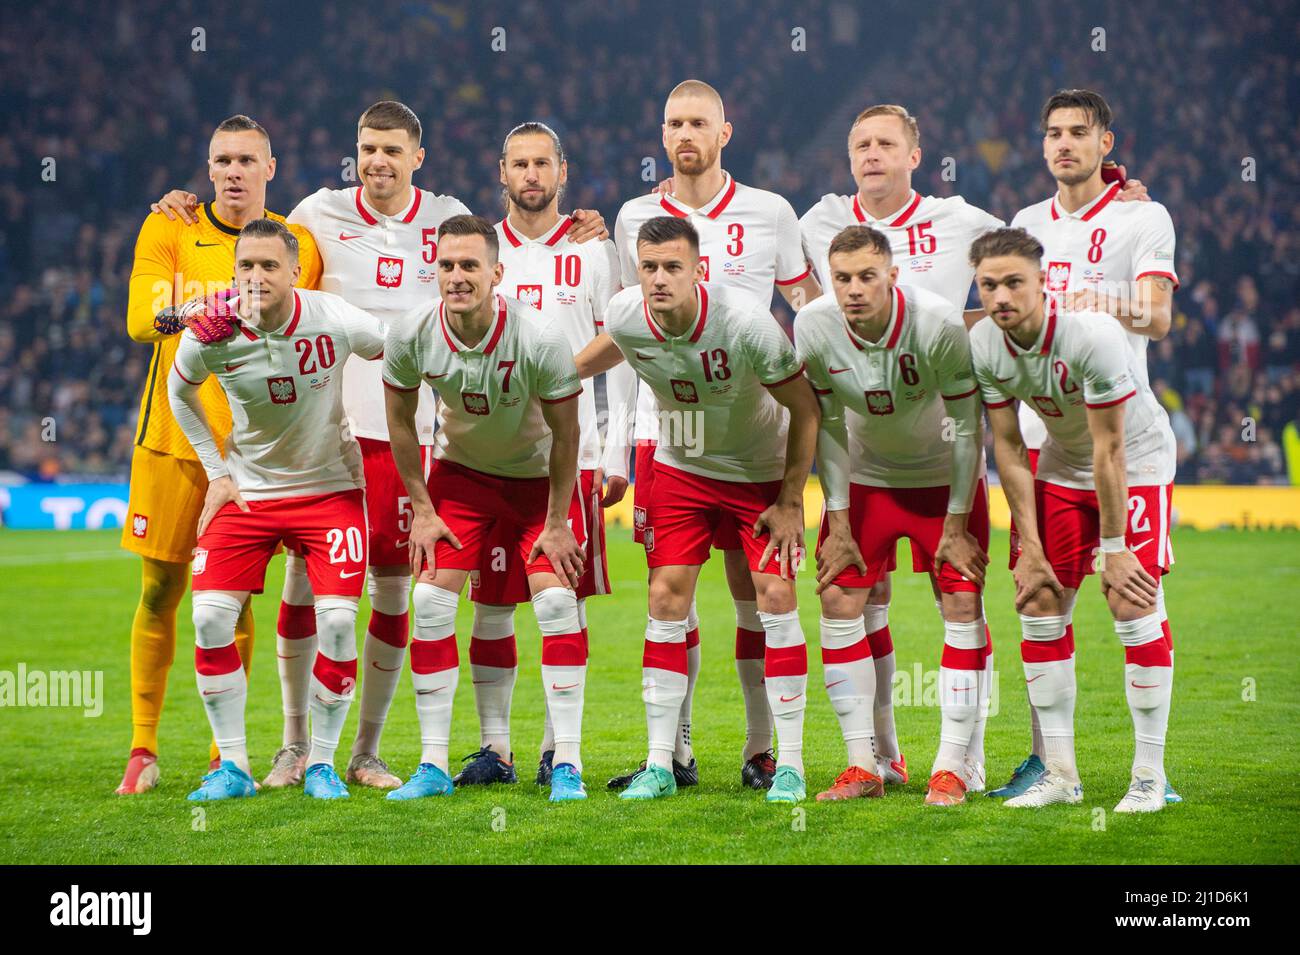 The Polish national football team poses for a photo during the  International Friendly Match between Scotland and Poland at Hampden Park in  Glasgow, Scotland on March 24, 2022 (Photo by Andrew Surma/